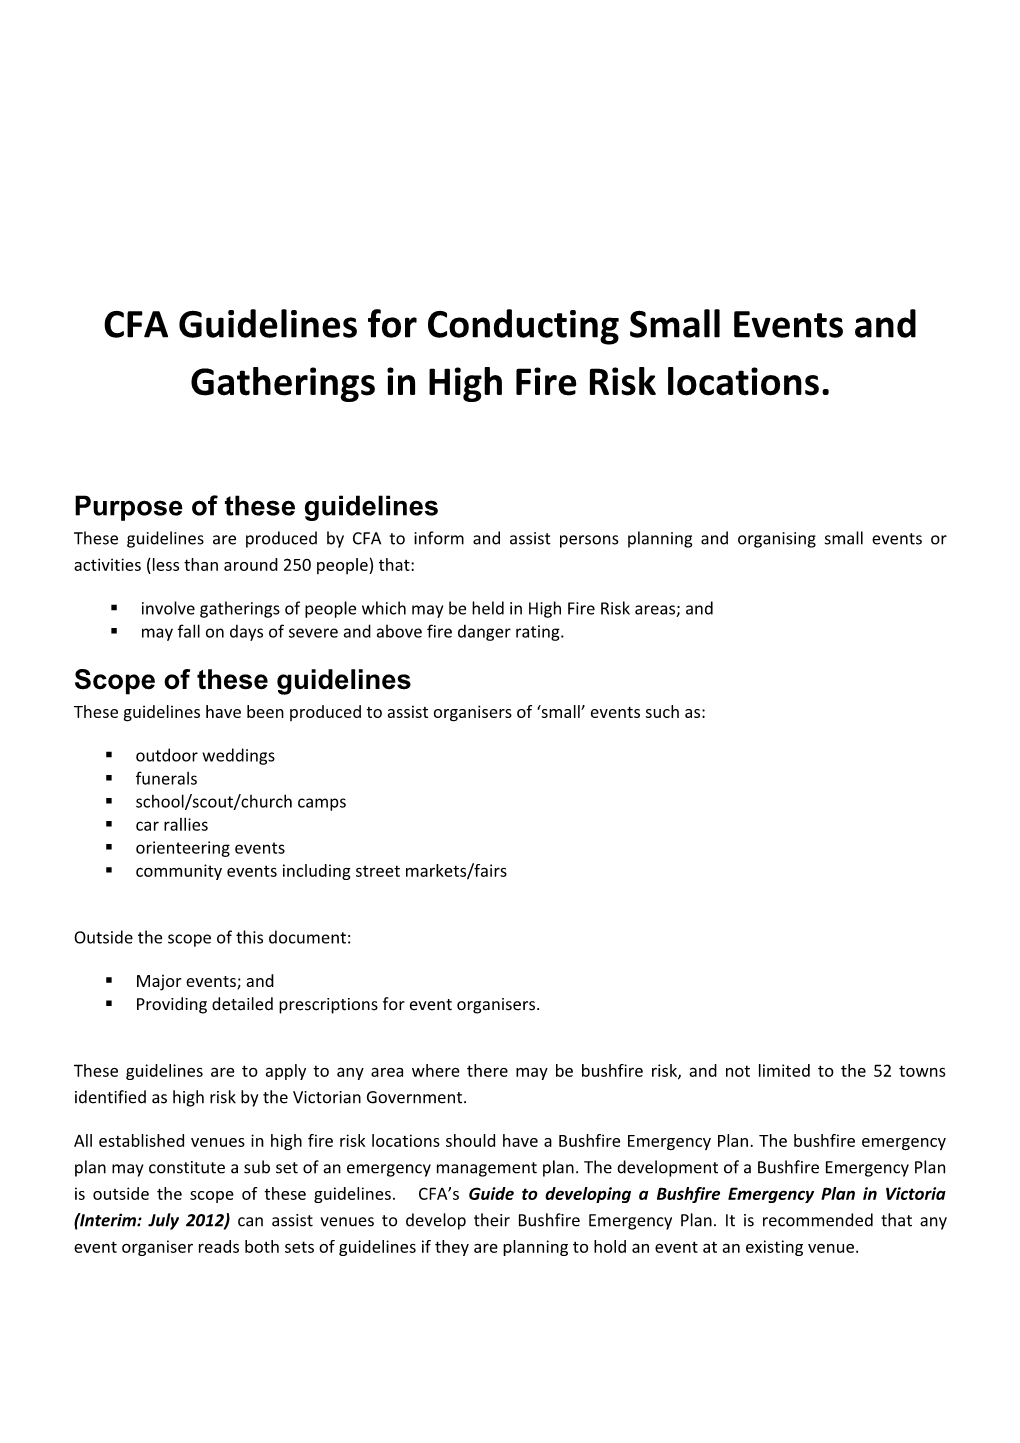 CFA Guidelines for Conducting Small Events and Gatherings in High Fire Risk Locations